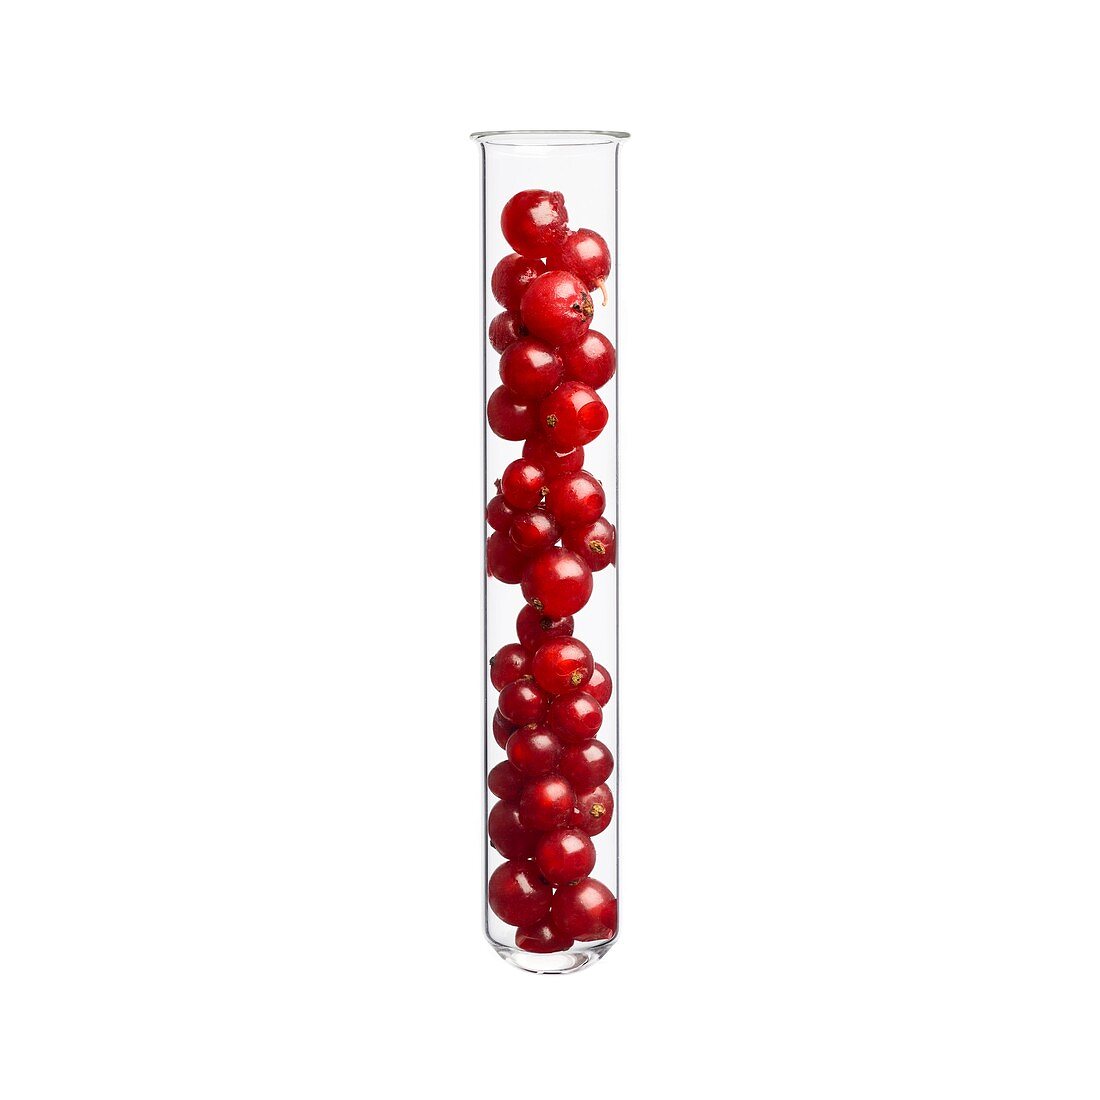 Redcurrants in test tube